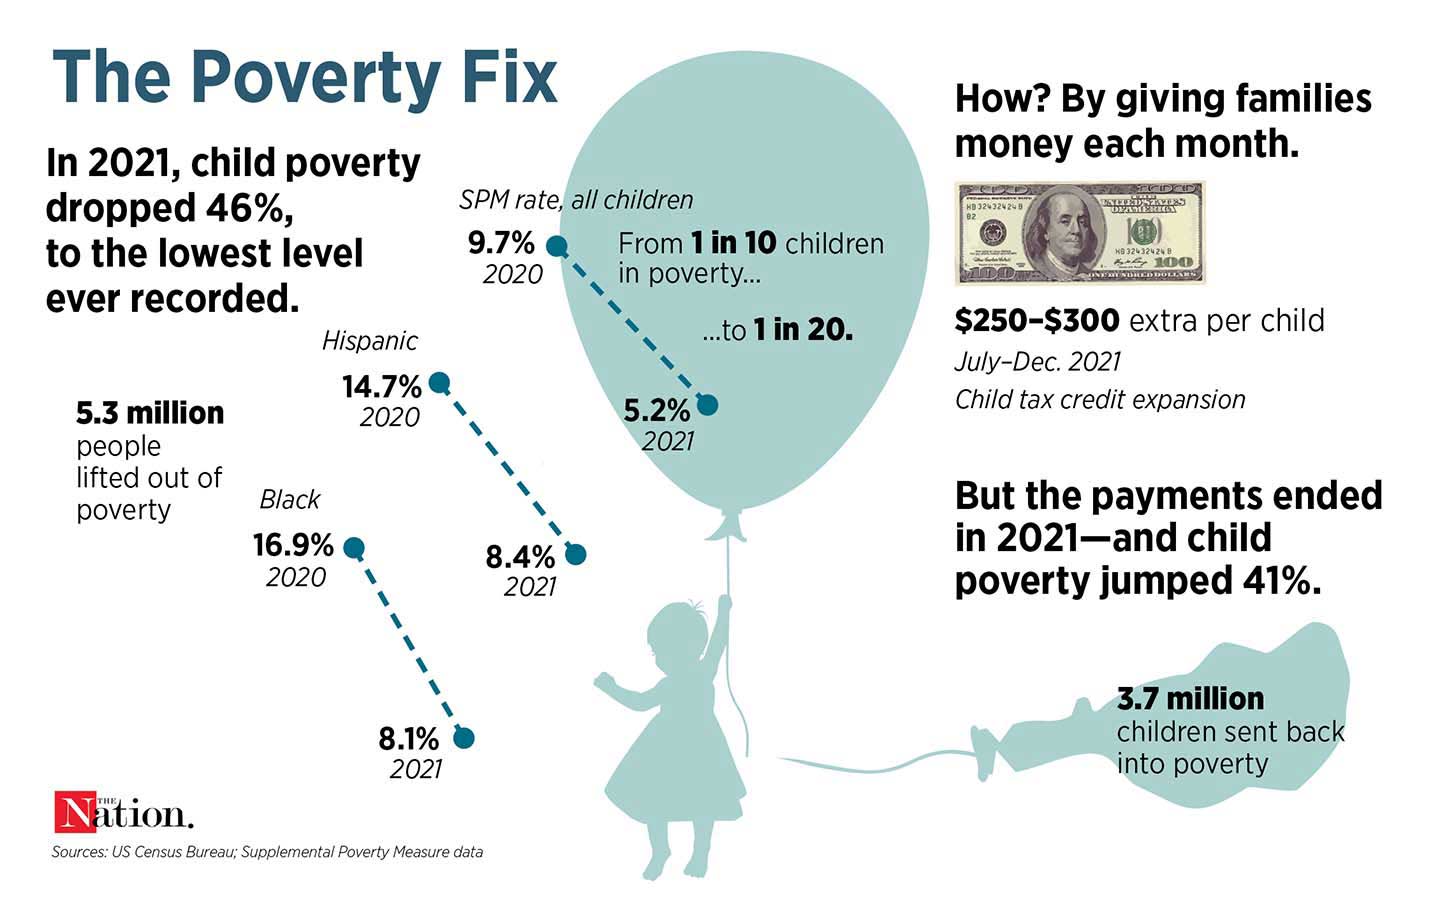 We Have the Solution to Child Poverty. Republicans Are Blocking It.